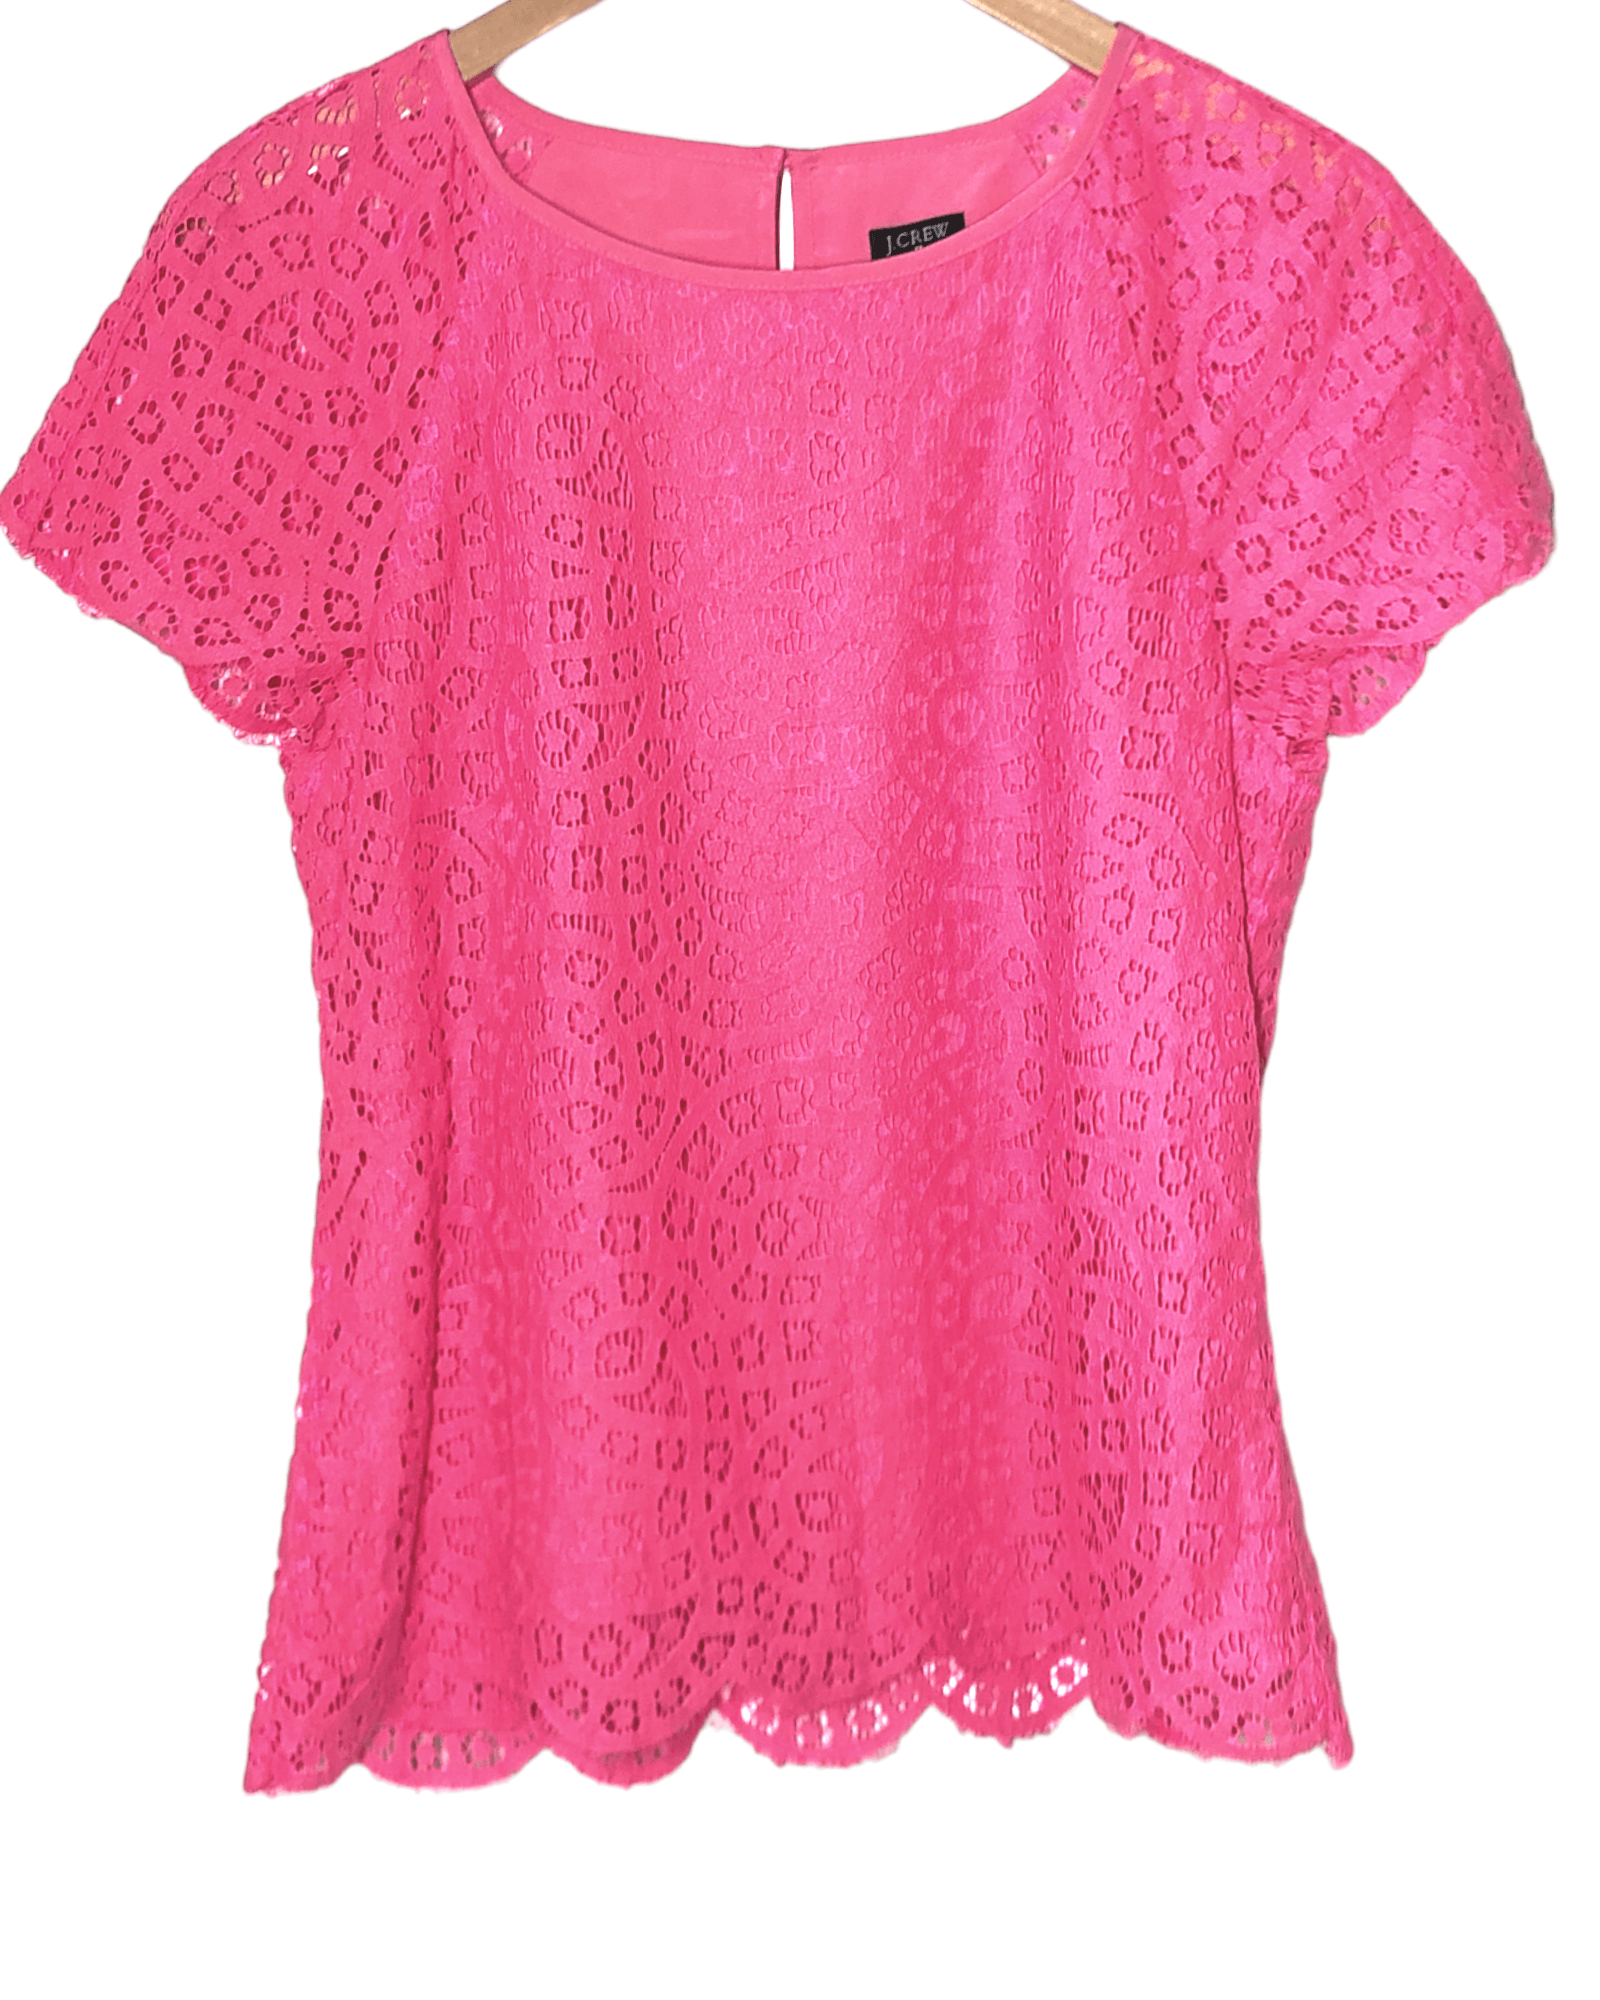 Bright Spring J.CREW hot pink raindrop lace blouse